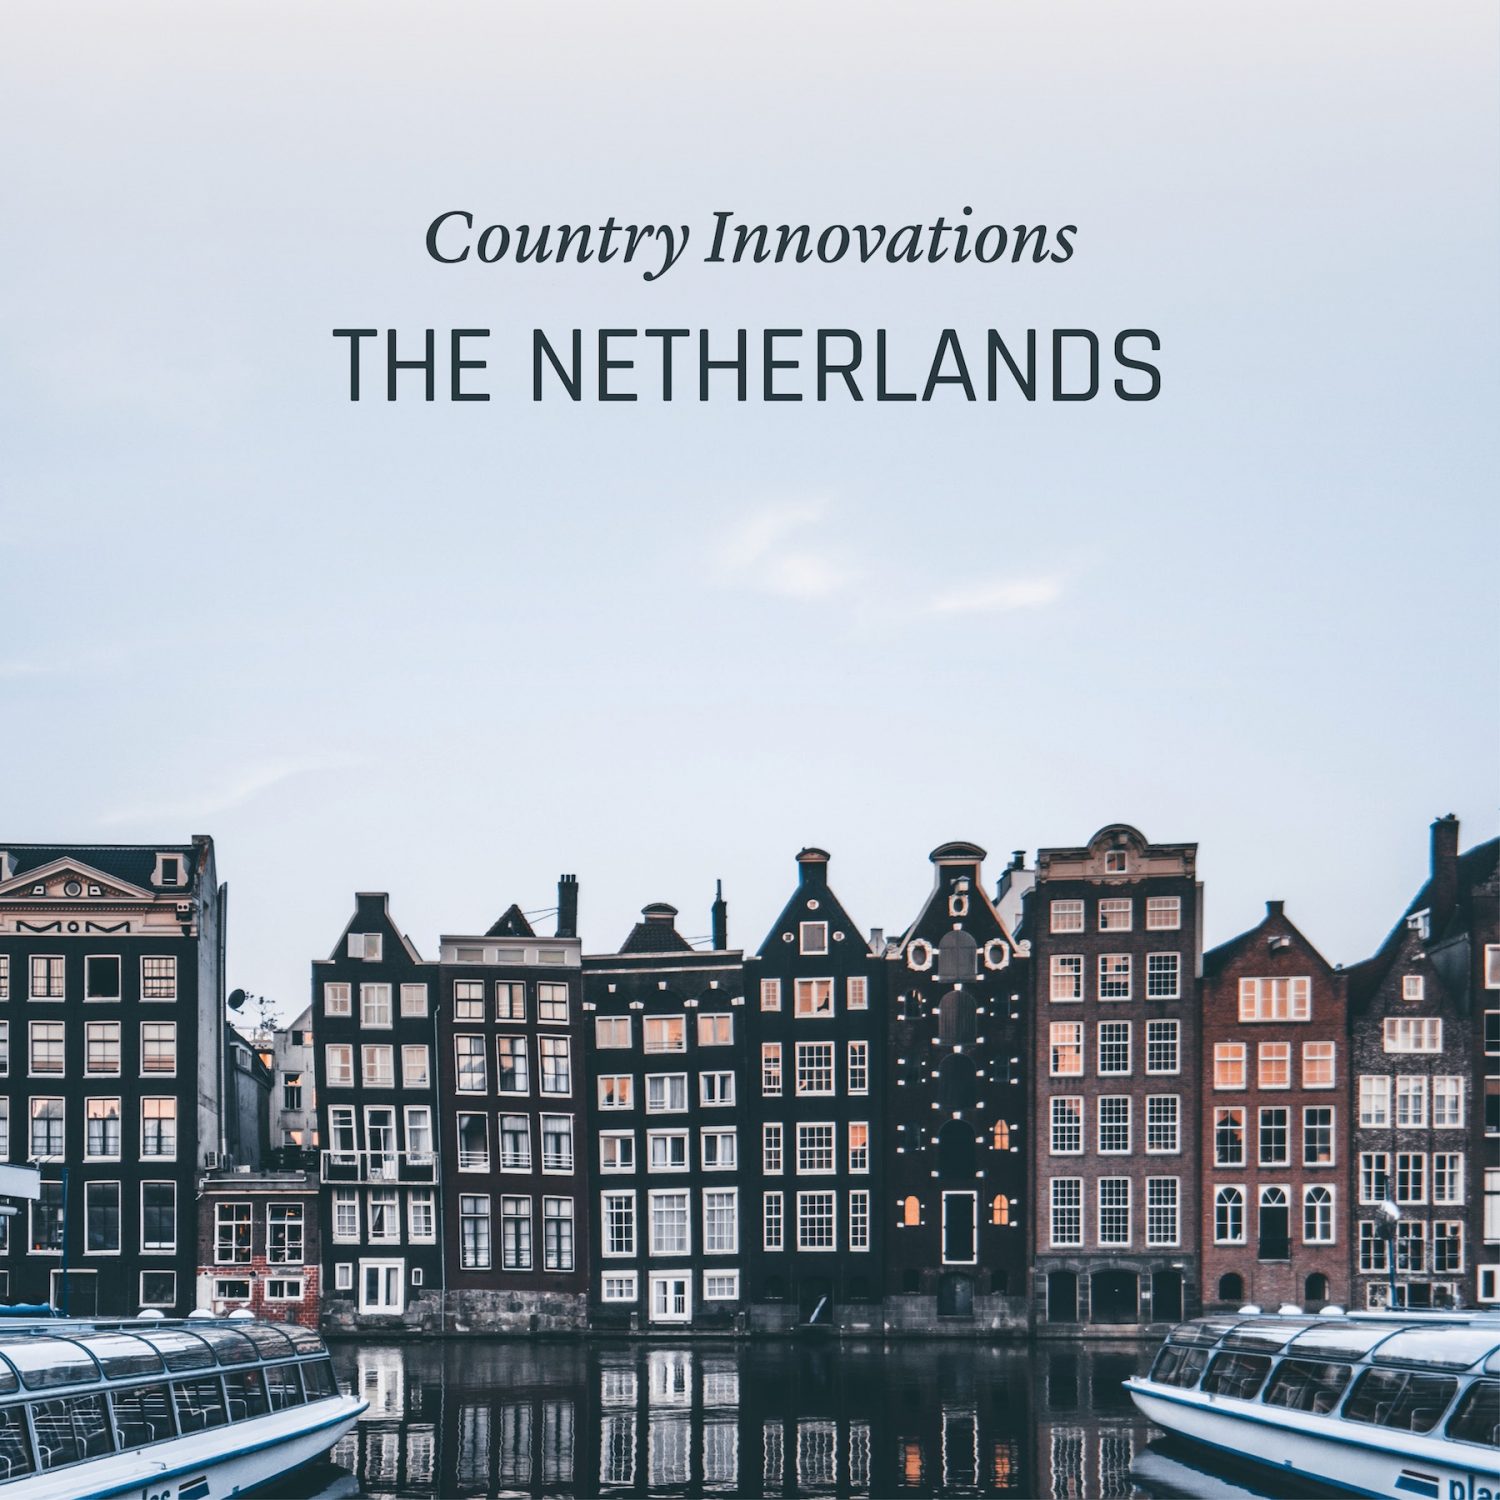 The Netherlands Environment Environmental Innovations Technology Climate Change Zero Waste Renewables